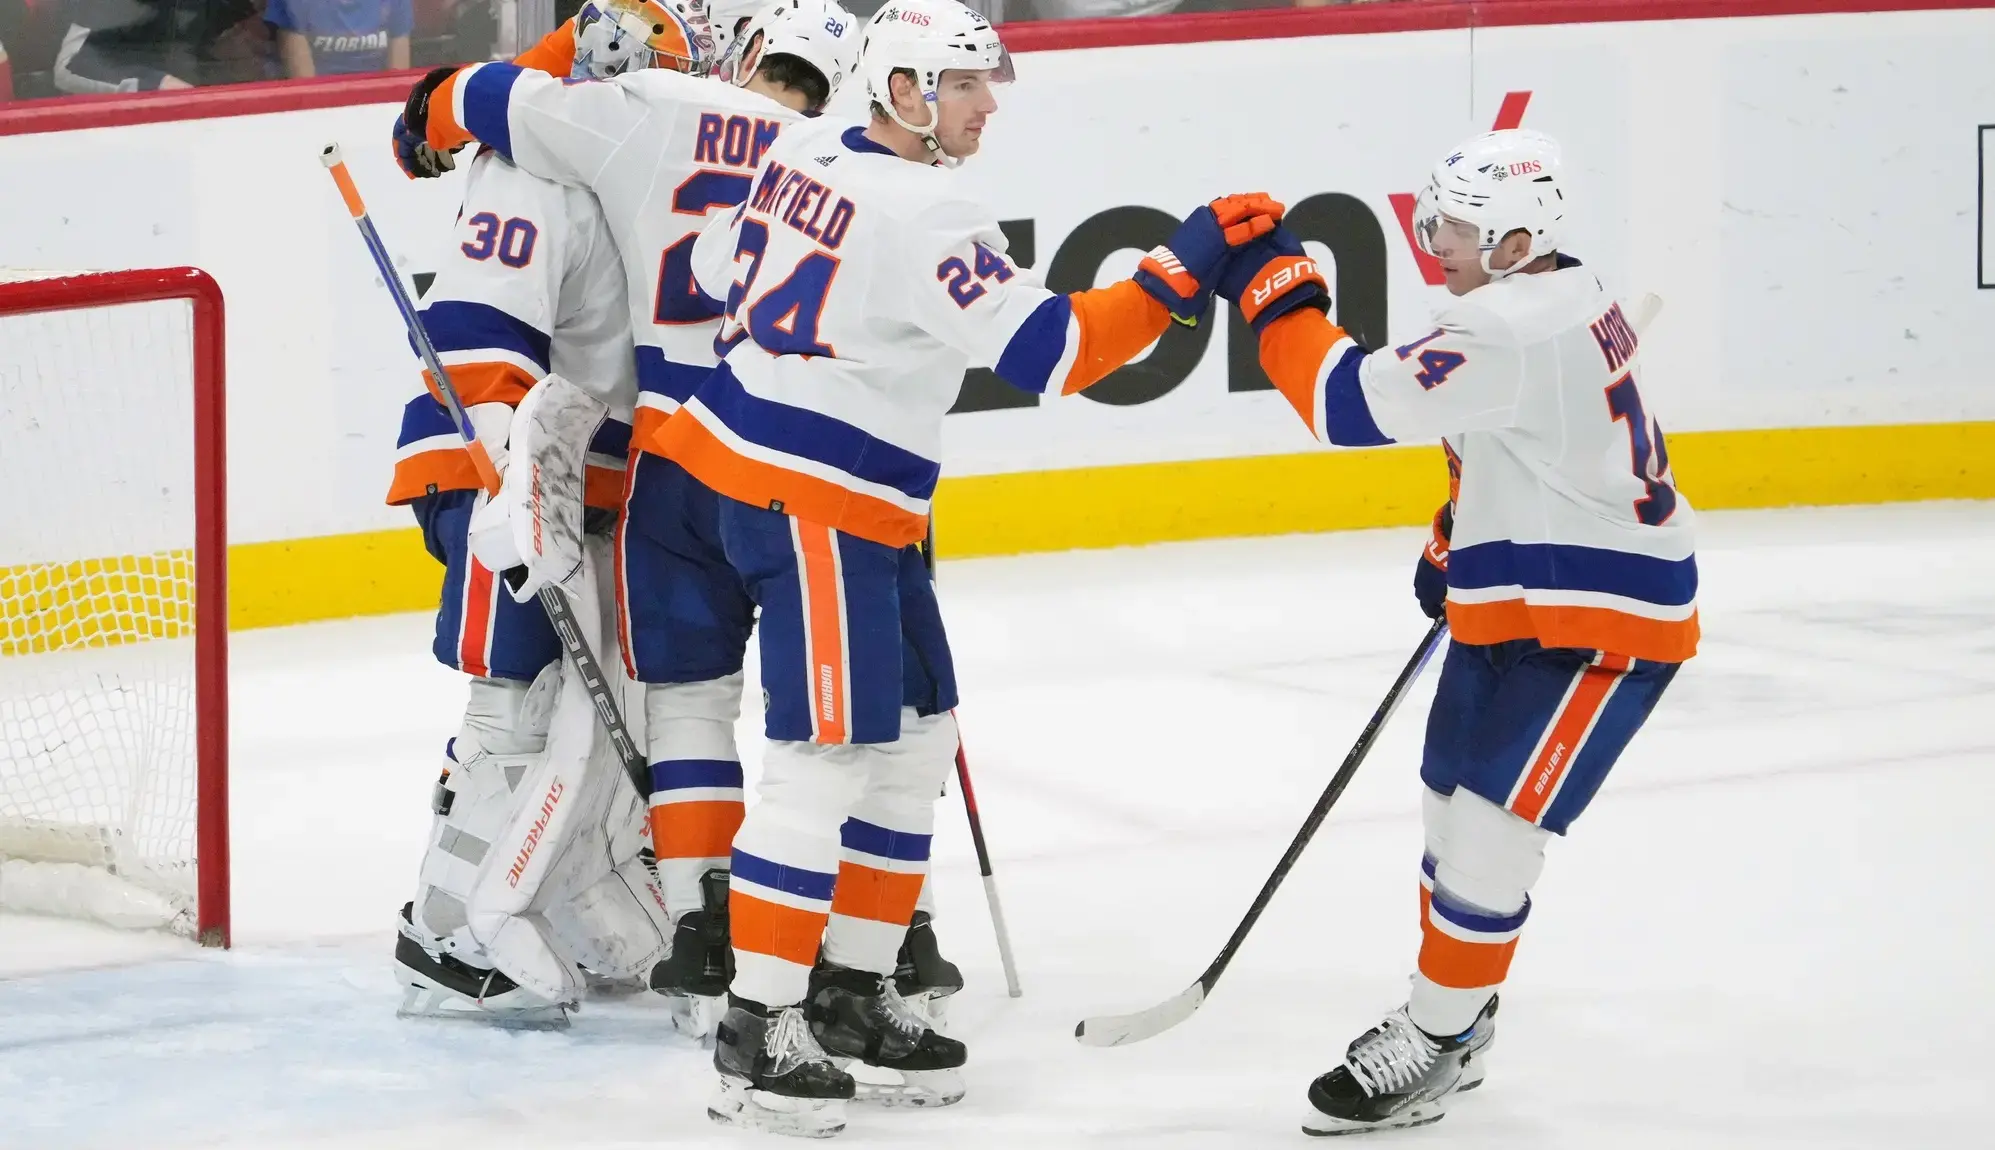 New York Islanders teammates celebrate after defeating the Florida Panthers at Amerant Bank Arena. / Jasen Vinlove-USA TODAY Sports